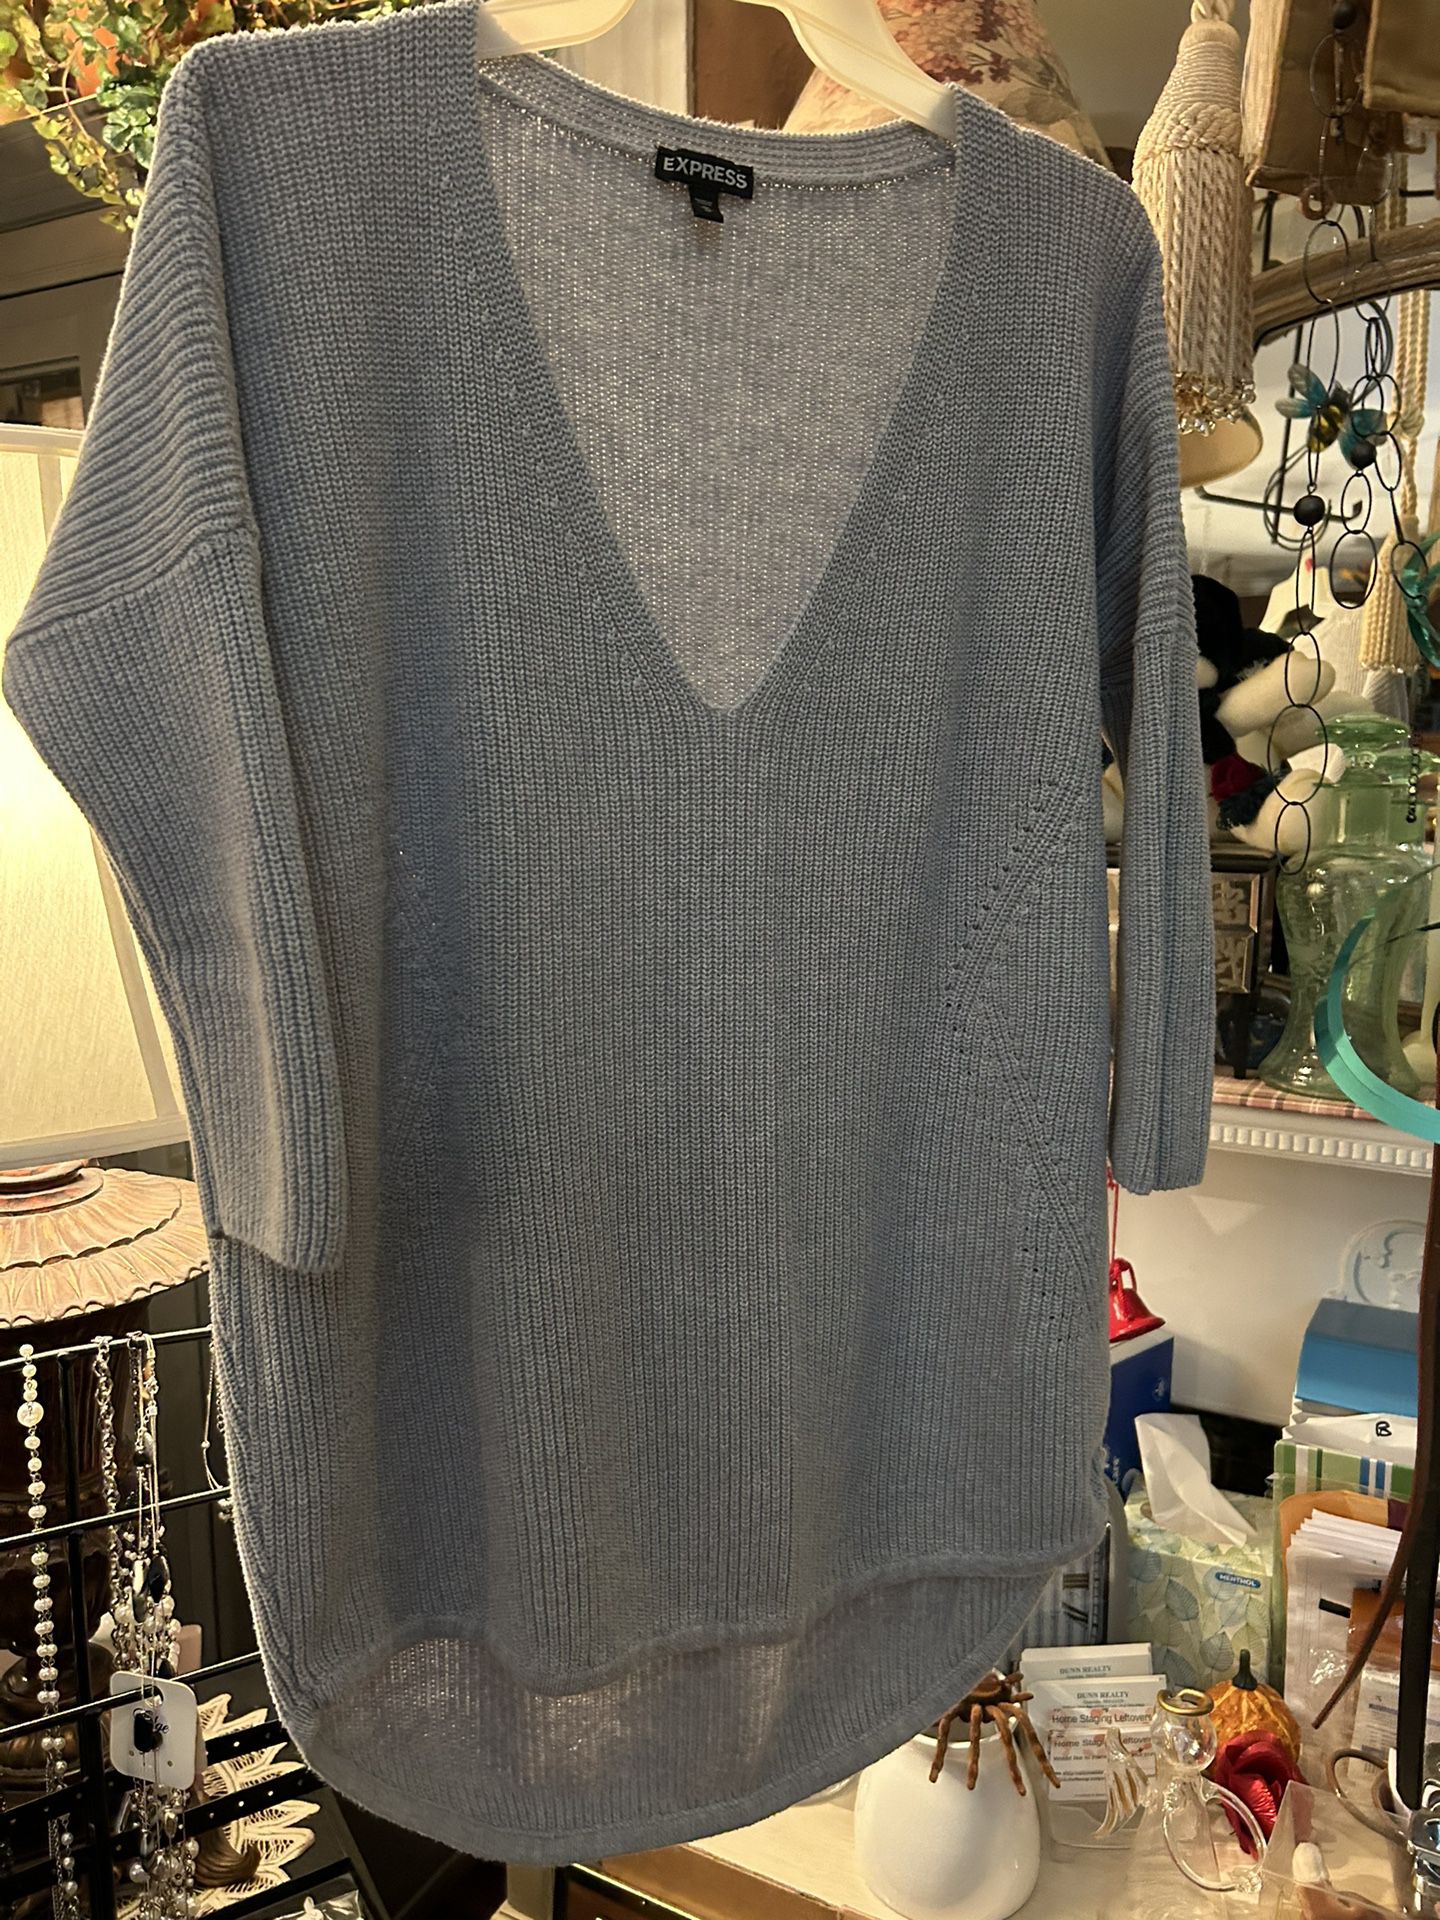 Ladies Medium Express Blue Knit Tunic Sweater With 3/4 Sleeves